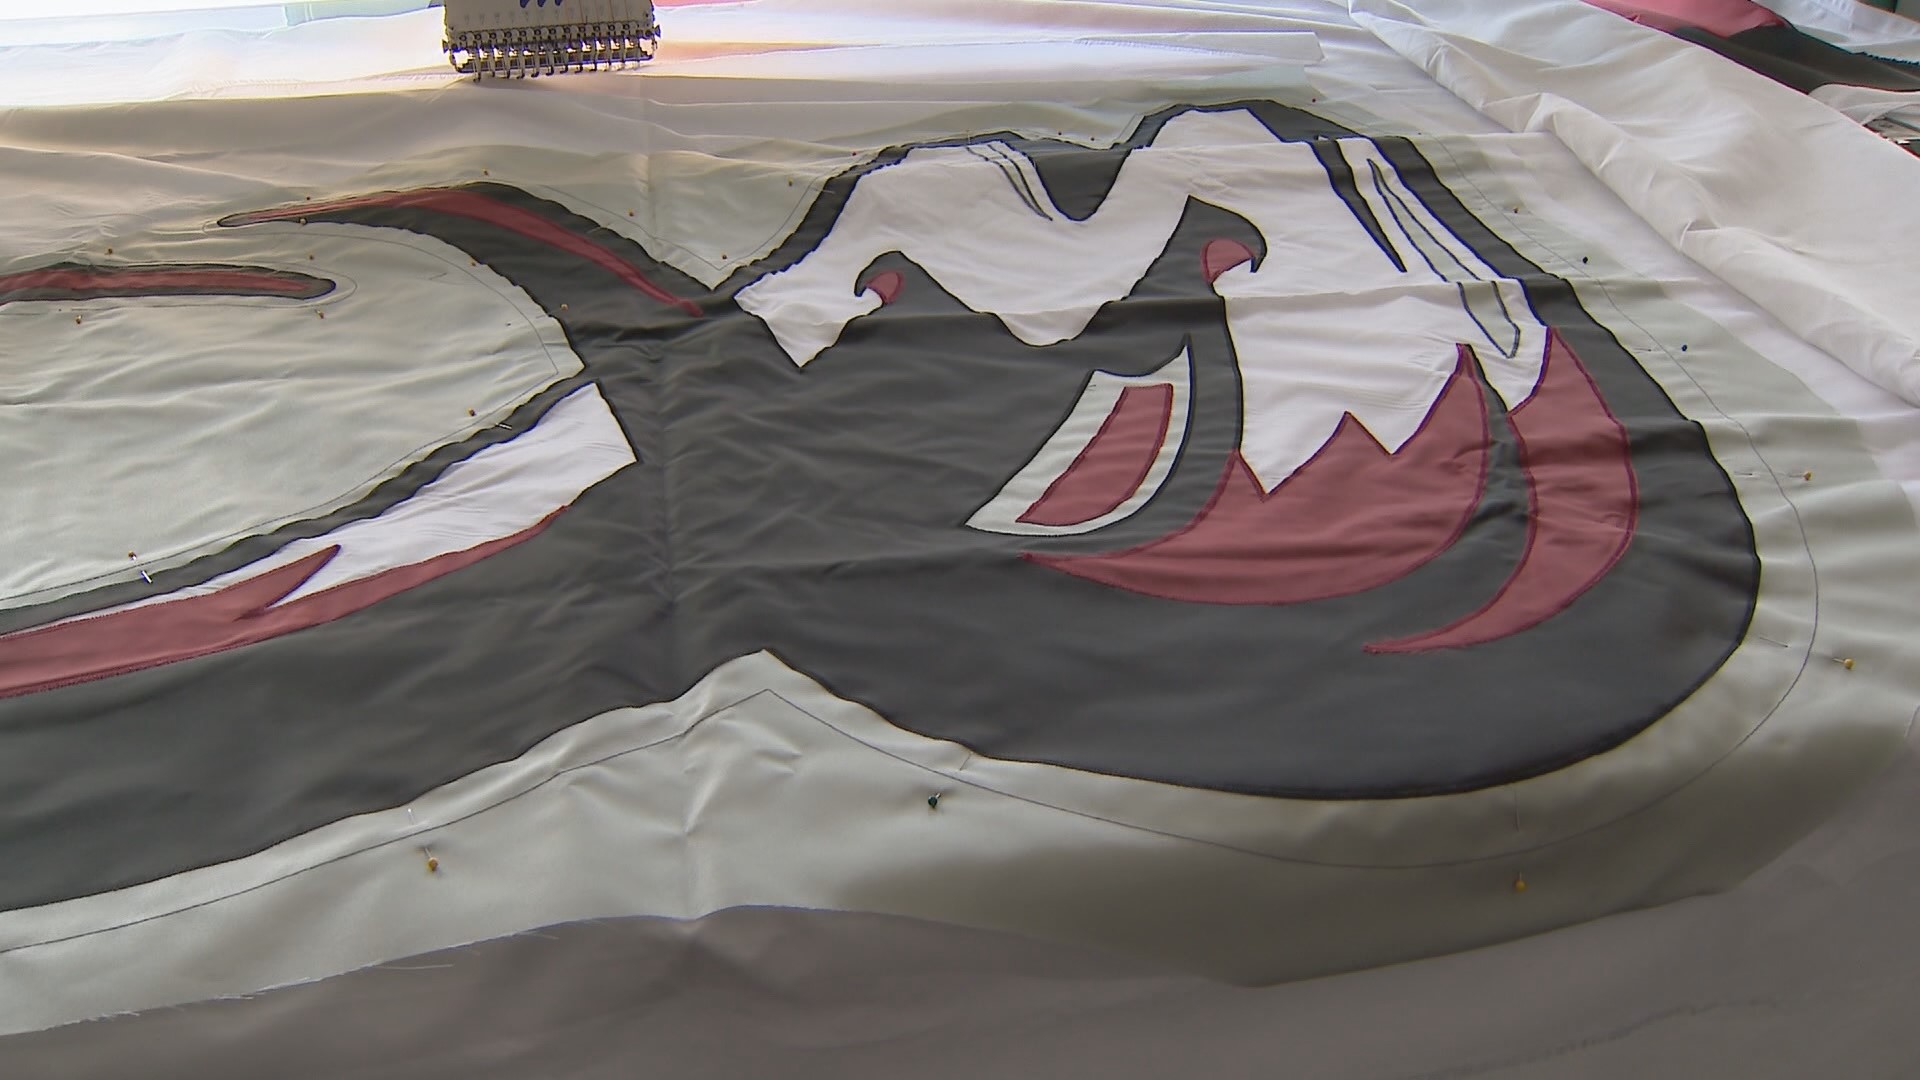 AC Flag and Banner is designing and stitching together the championship banners on behalf of the Colorado Avalanche, Colorado Mammoth, and DU Pioneers.